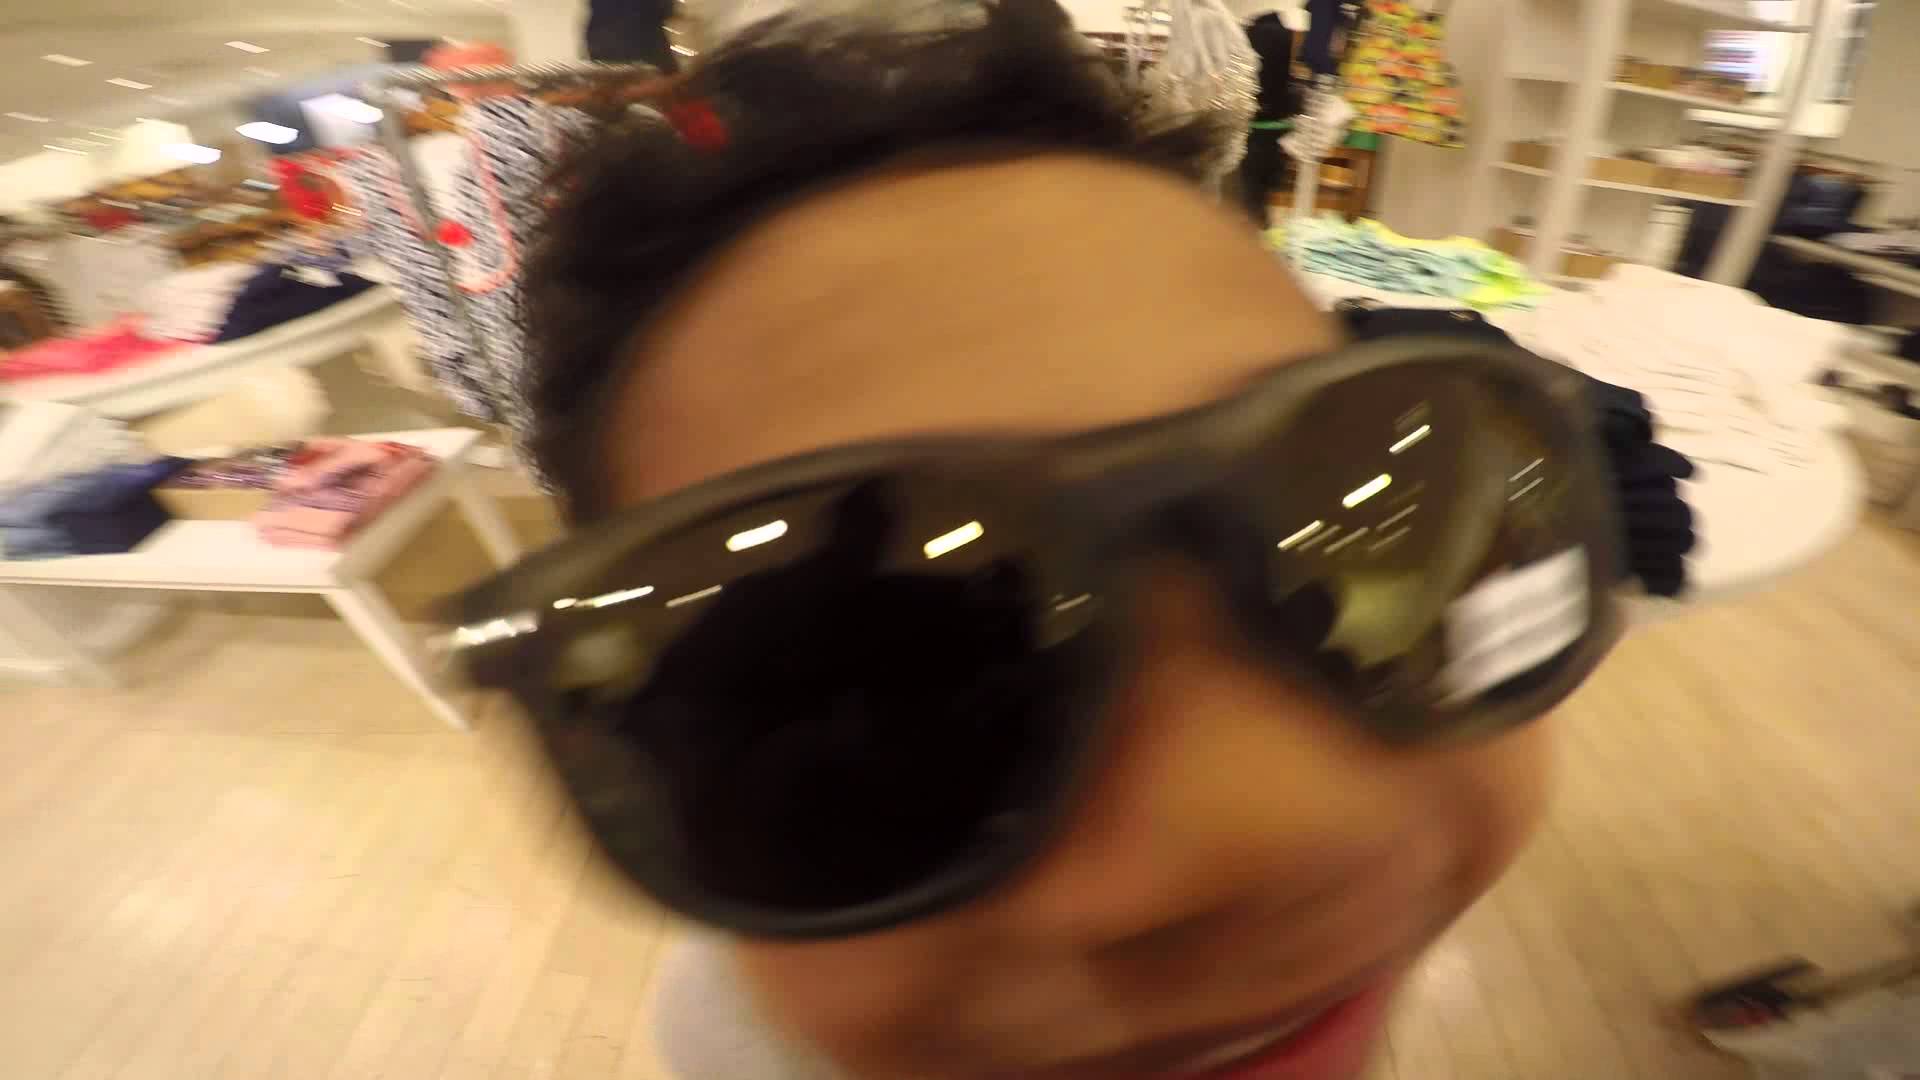 Fly guy trying on some new shades - YouTube